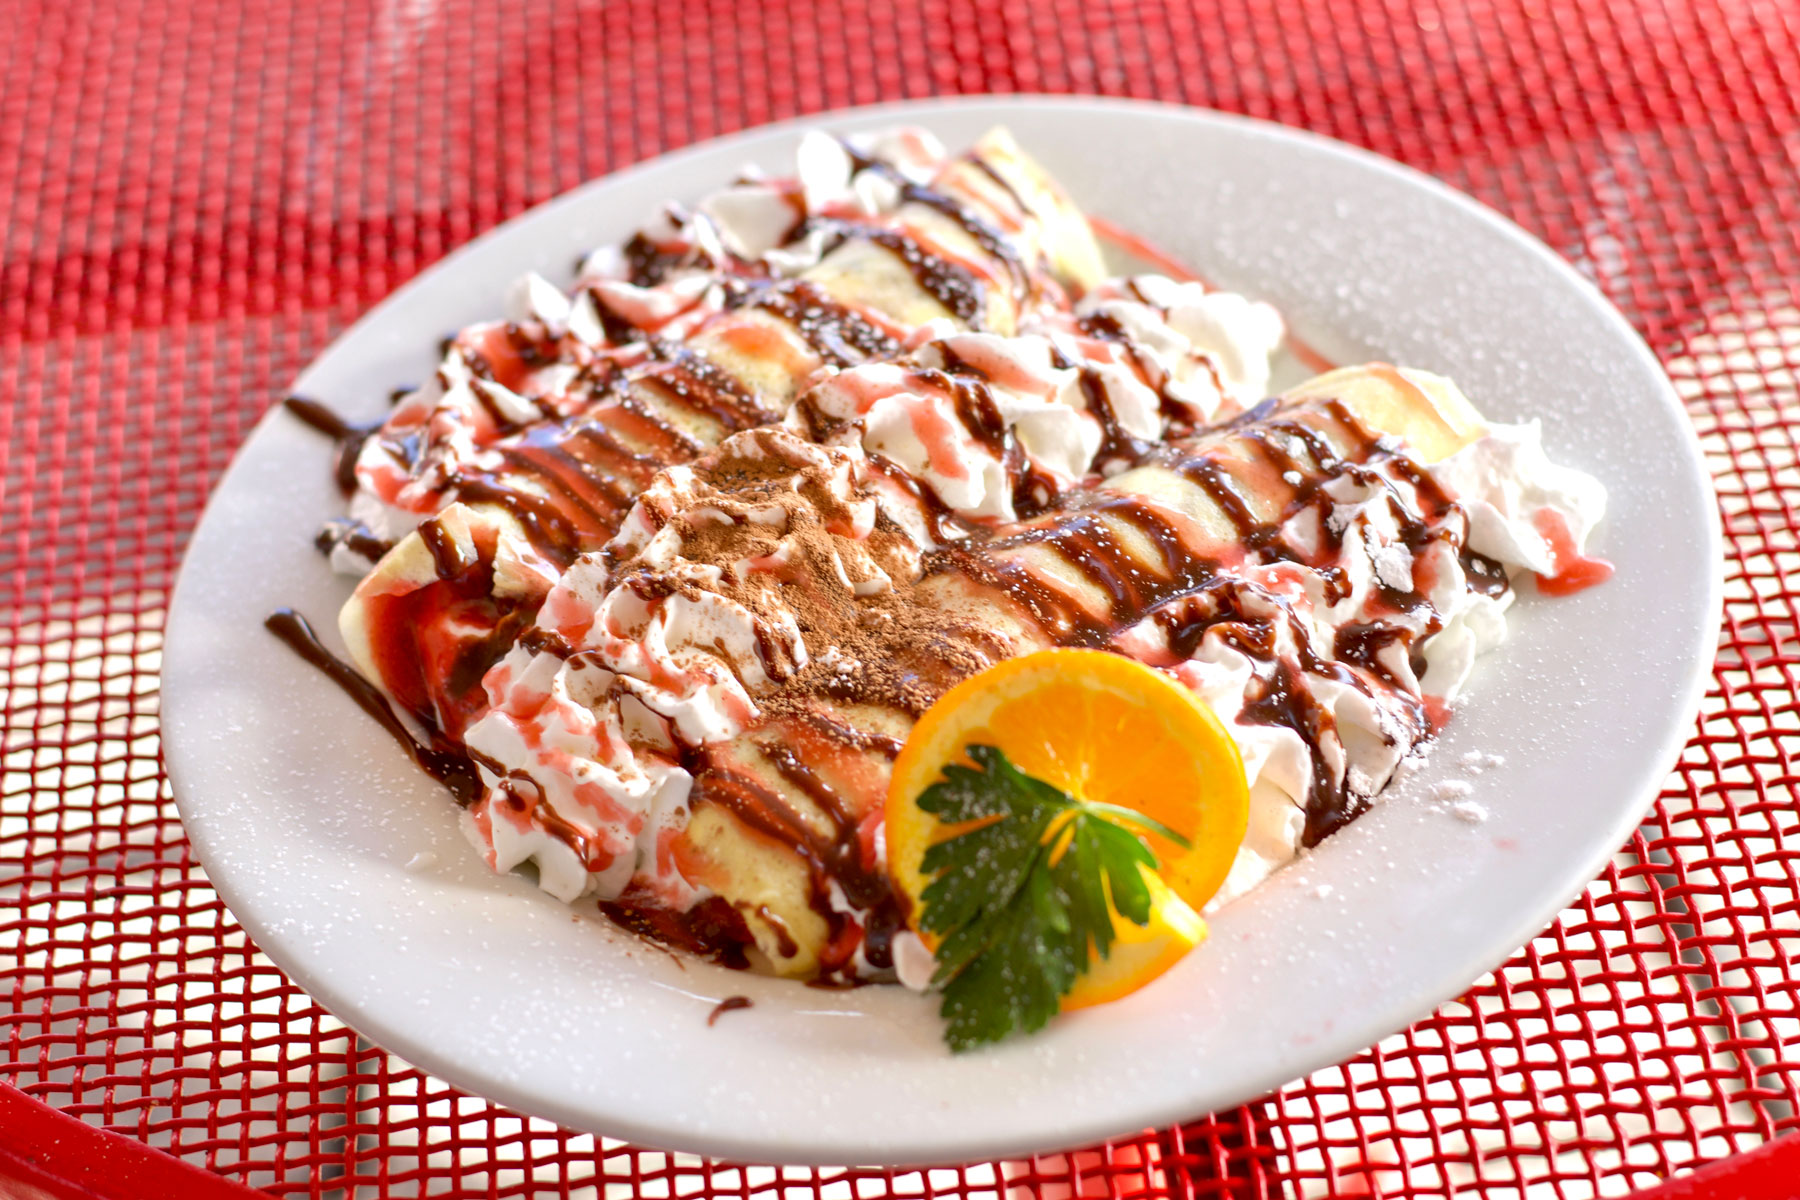 Strawberry Nutella Crepes at Ghini's French Caffe